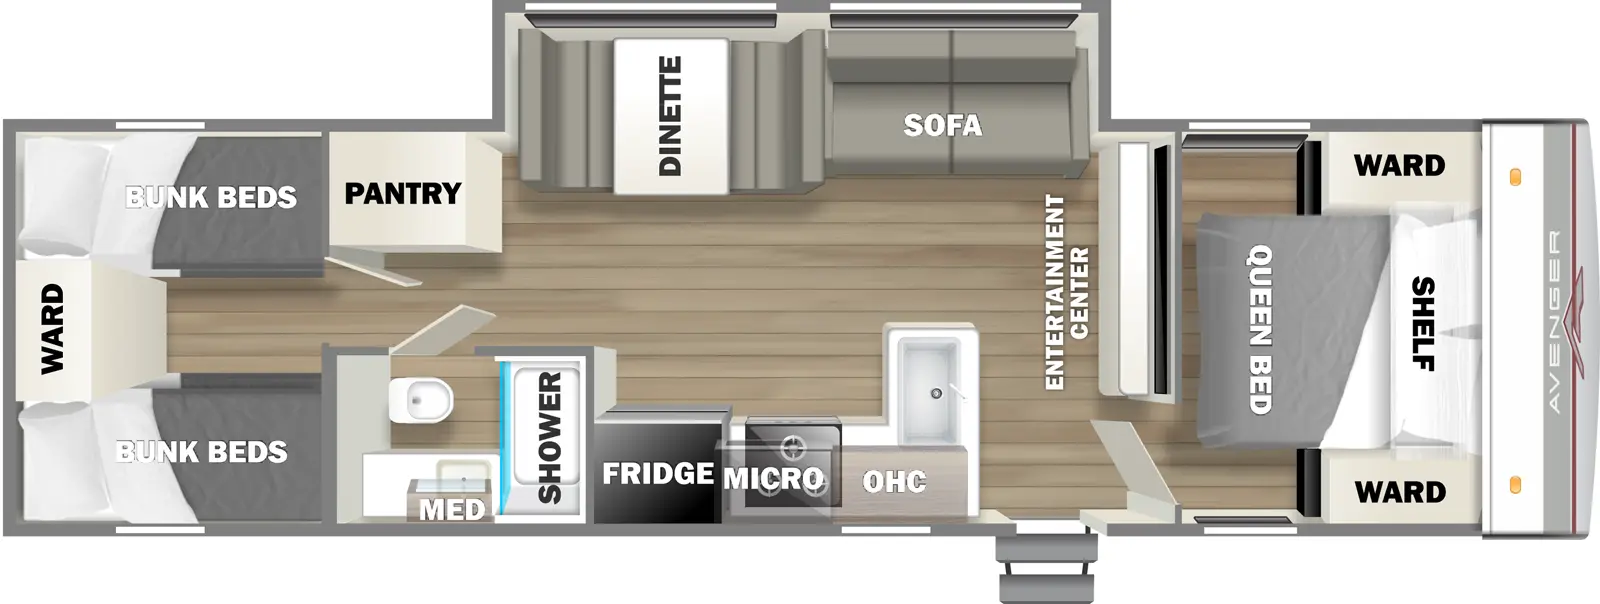 The 28QBSLE has one slideout and one entry. Interior layout front to back: foot facing queen bed with shelf above and wardrobes on each side; entertainment center along inner wall; off-door side slideout with sofa and dinette; door side entry, peninsula kitchen counter with sink, overhead cabinet, microwave, cooktop, and refrigerator; door side full bathroom with medicine cabinet; off-door side pantry; rear bunk room with bunk beds on each side and wardrobe between them in the rear.